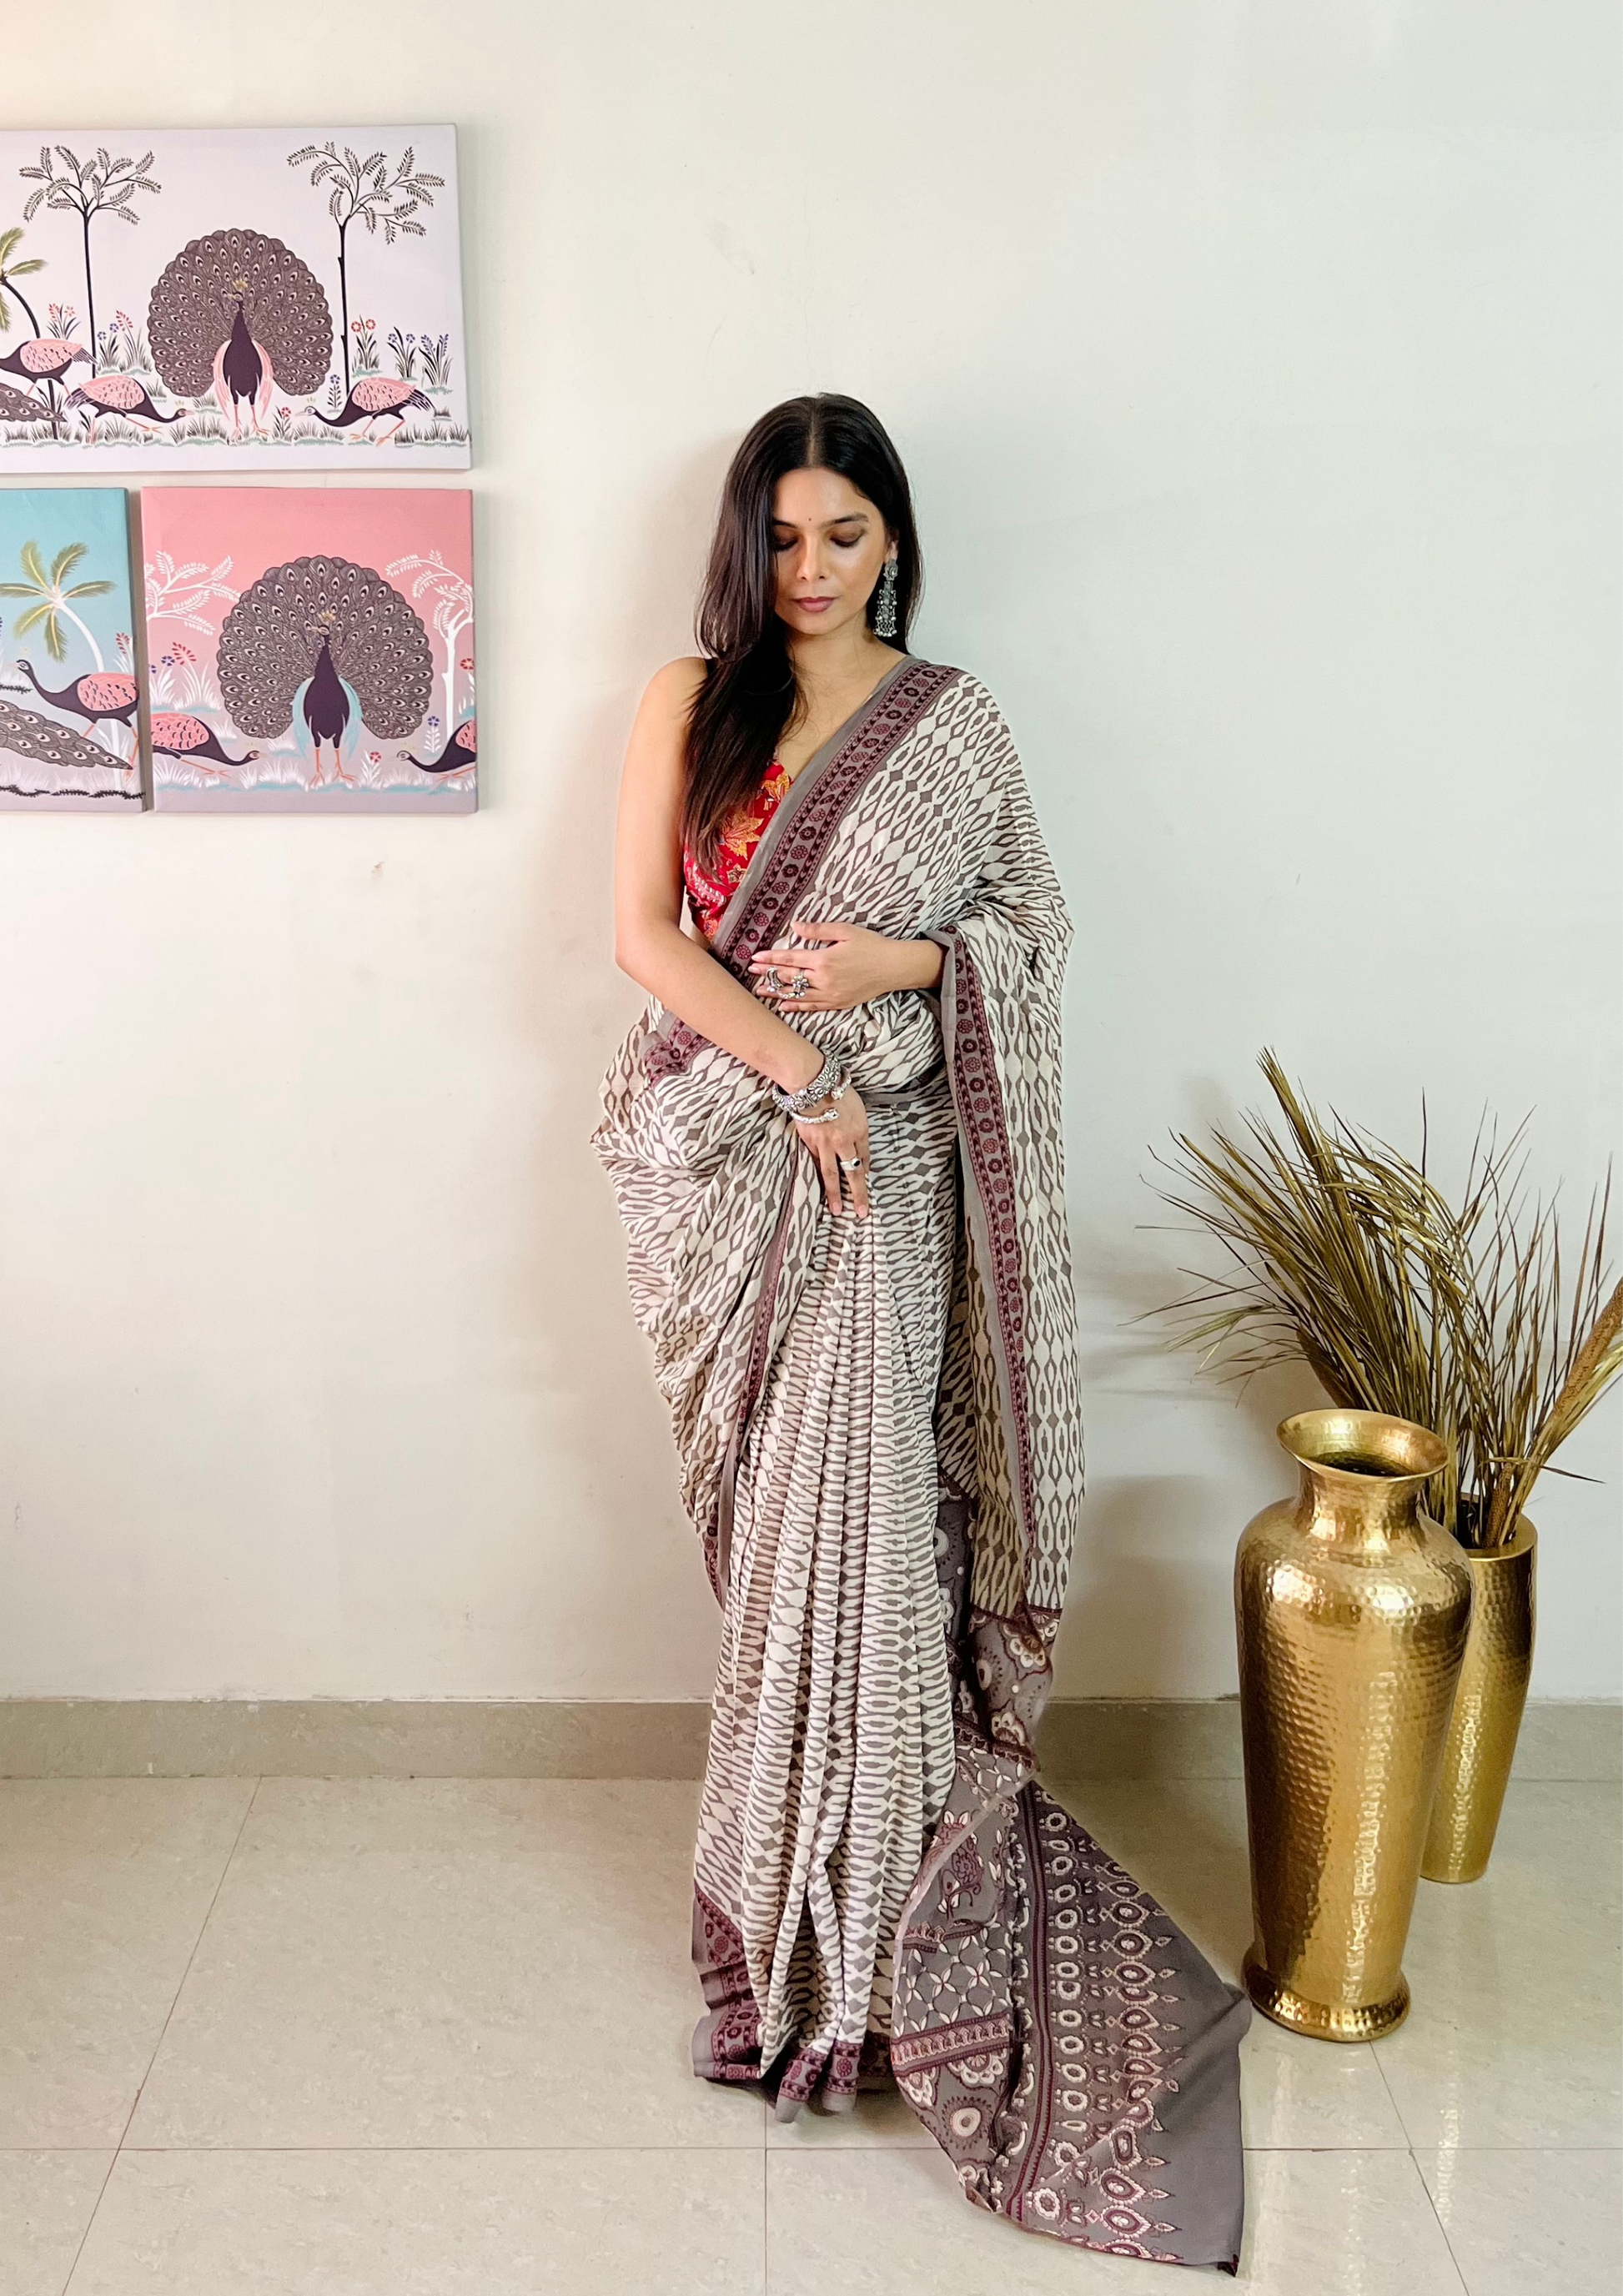 This is grey saree ❤️ Puuvu (Flower) Mul Mul Cotton Saree comes